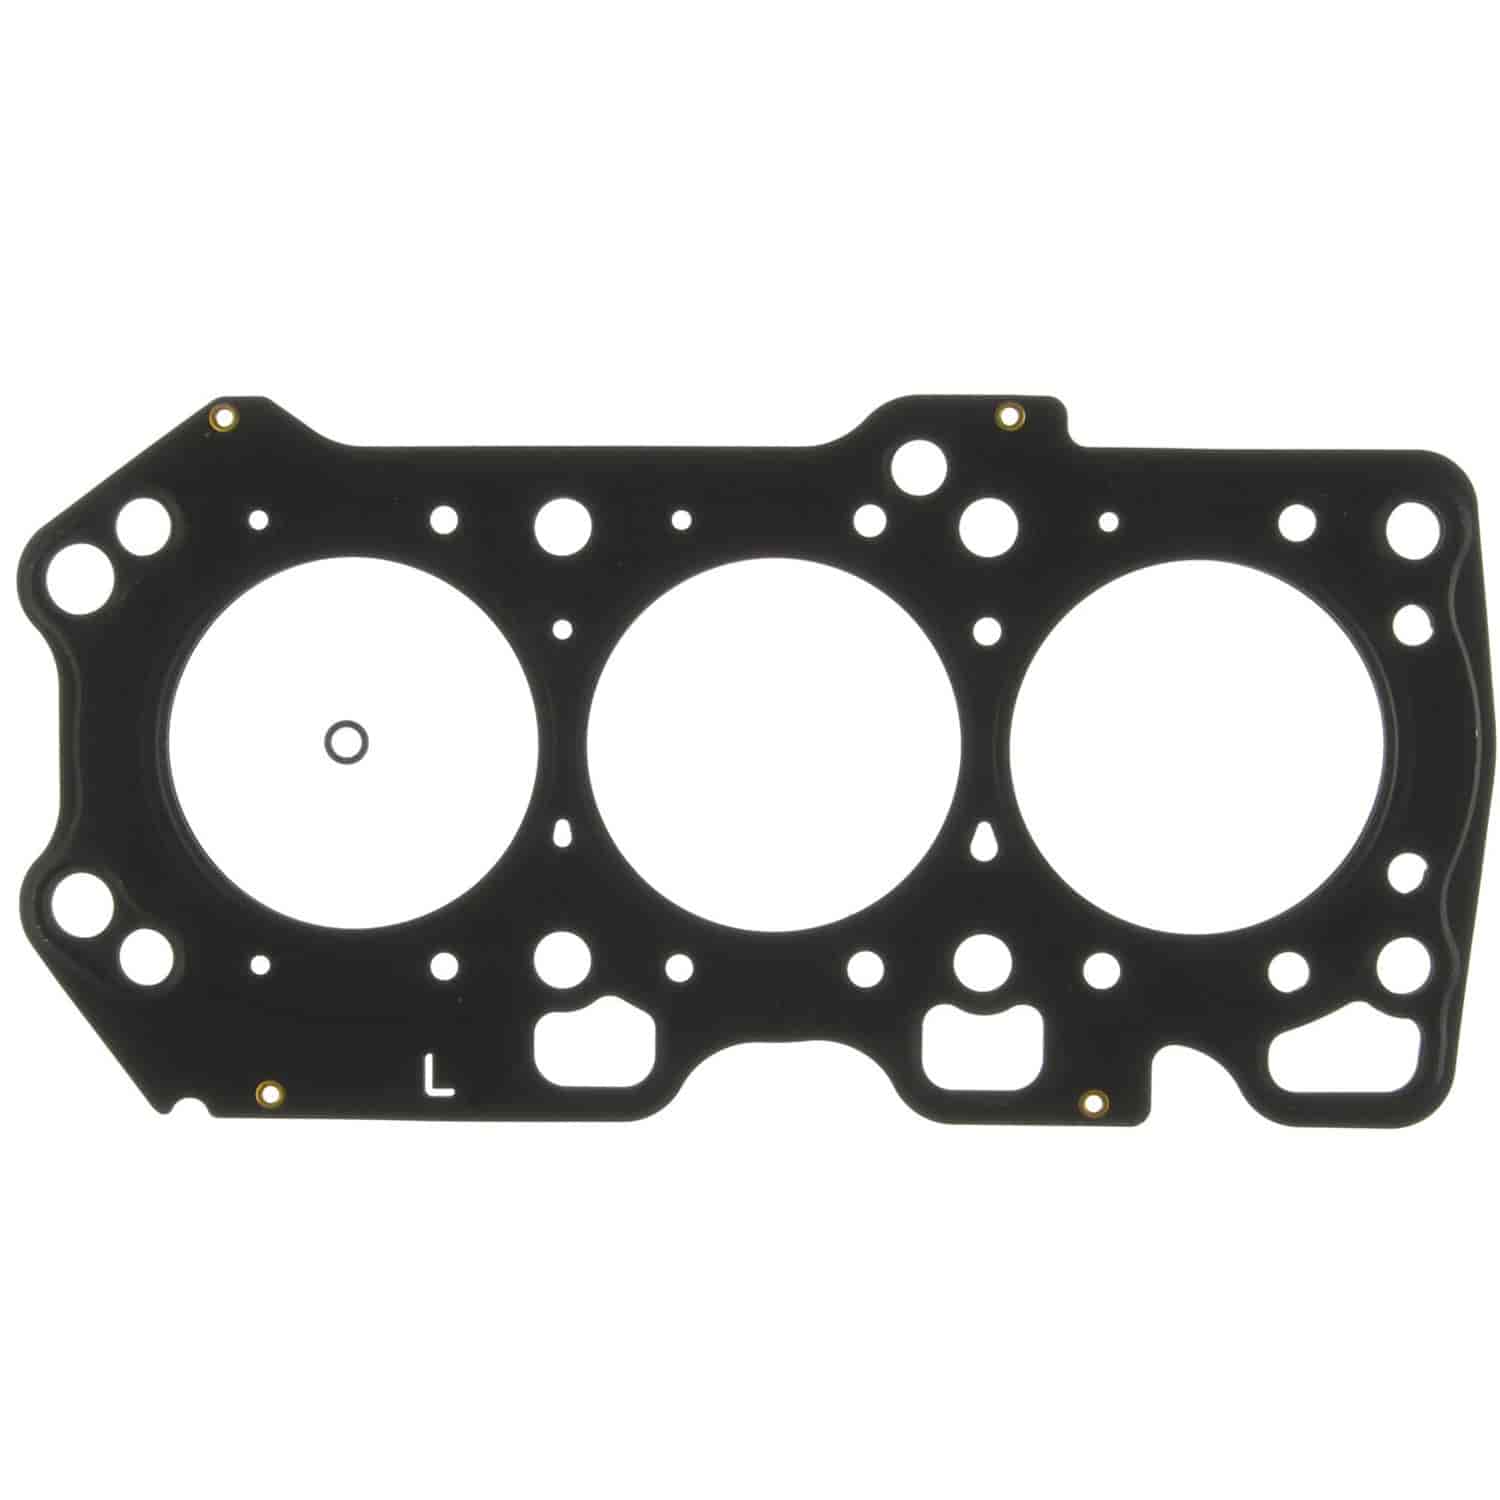 Cylinder Head Gasket Ford-Pass Probe 152 2.5L V6 Eng 93-97  Mazda-Pass 626 MX6 Millenia